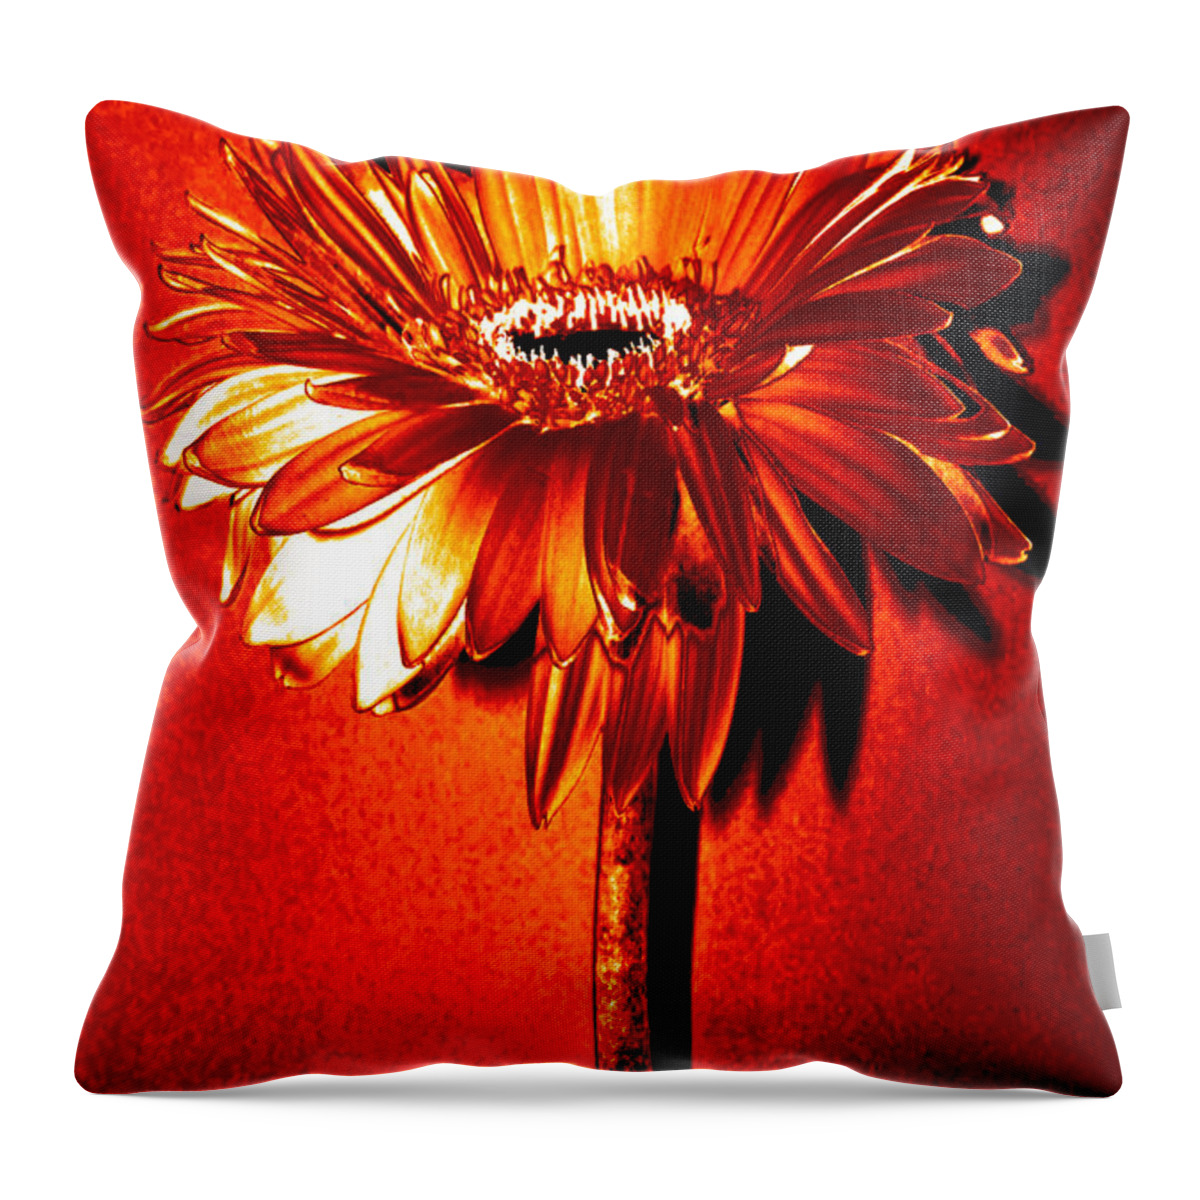 Original Photo Throw Pillow featuring the photograph Tequila Sunrise Zinnia by Sherry Allen